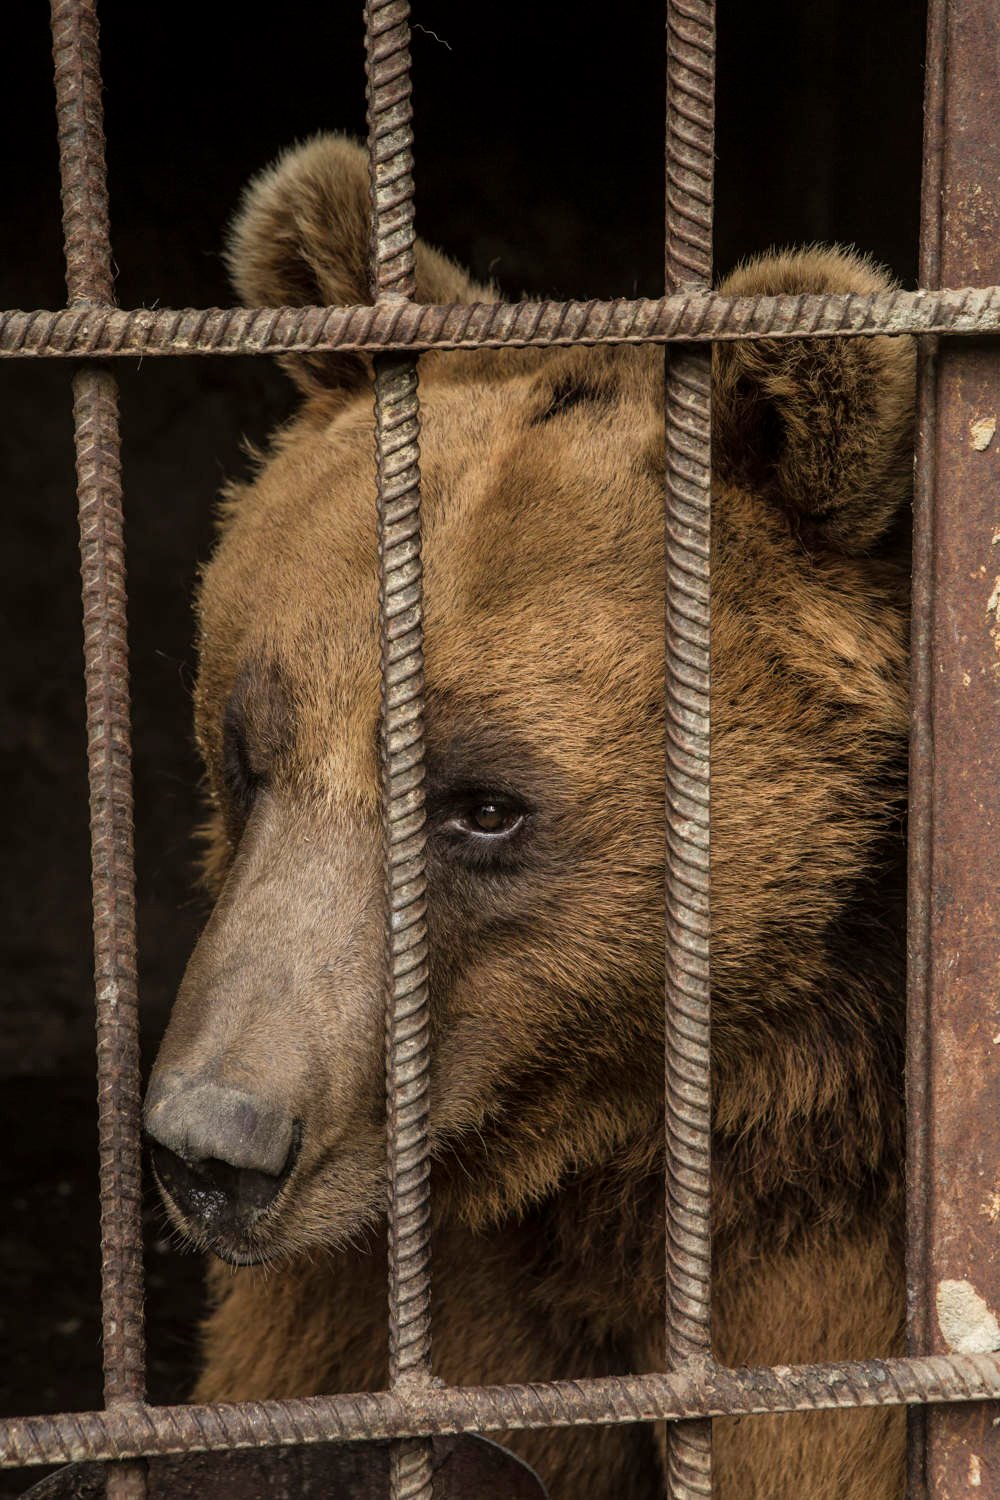 Baloo the bear in a cage.